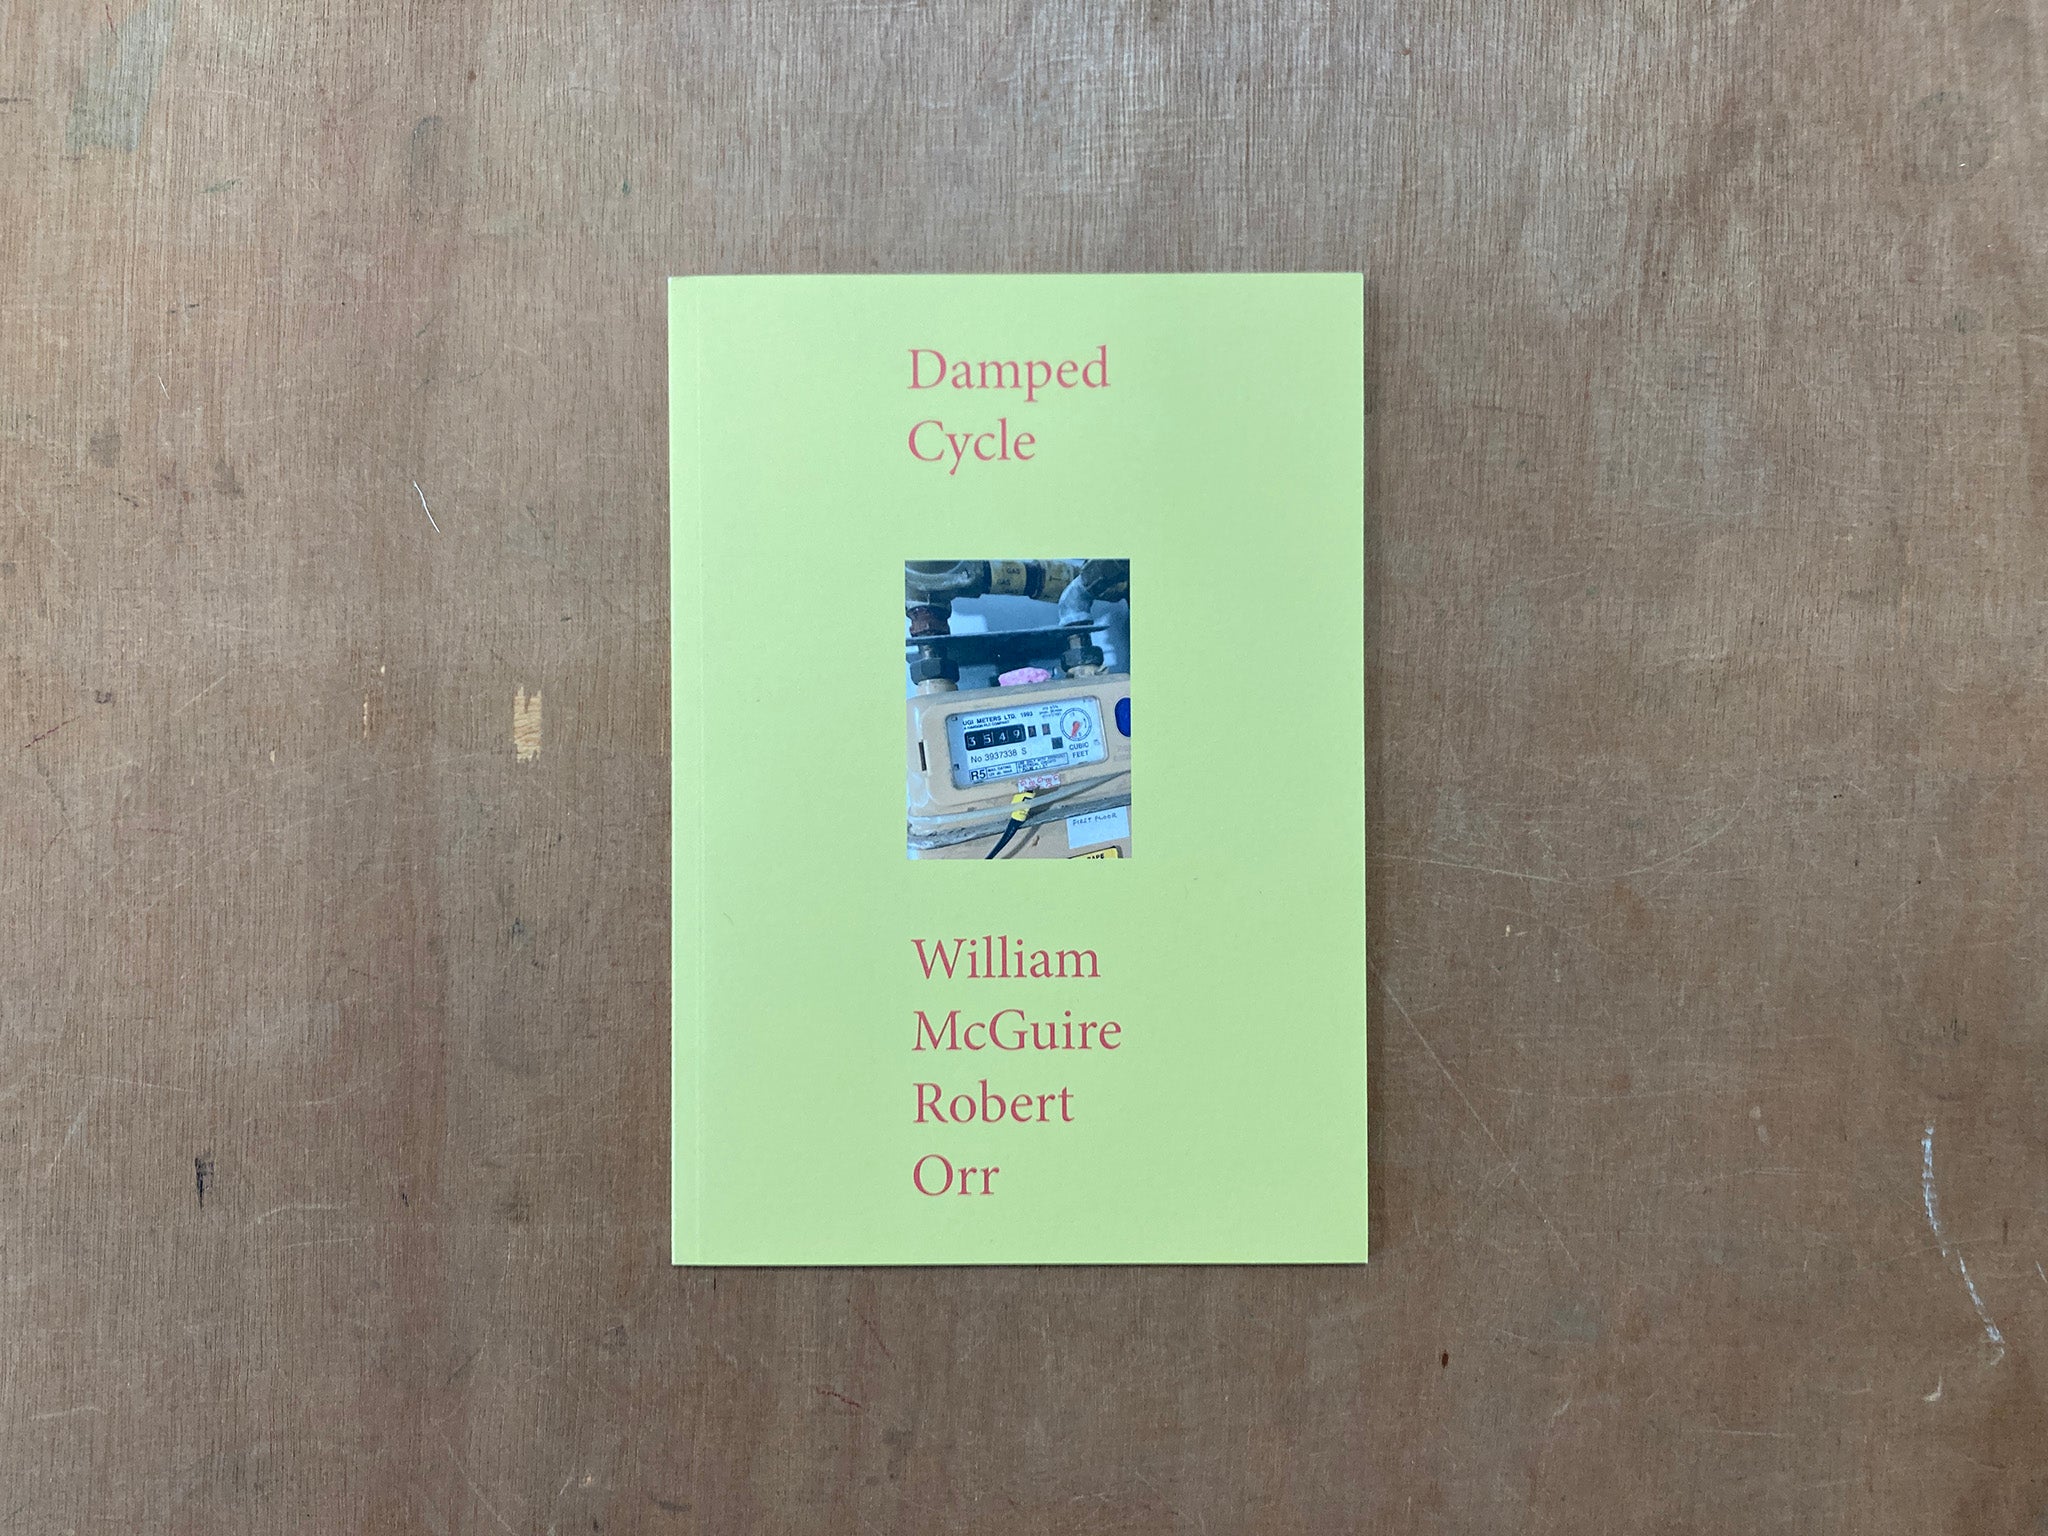 DAMPED CYCLE by William McGuire & Robert Orr